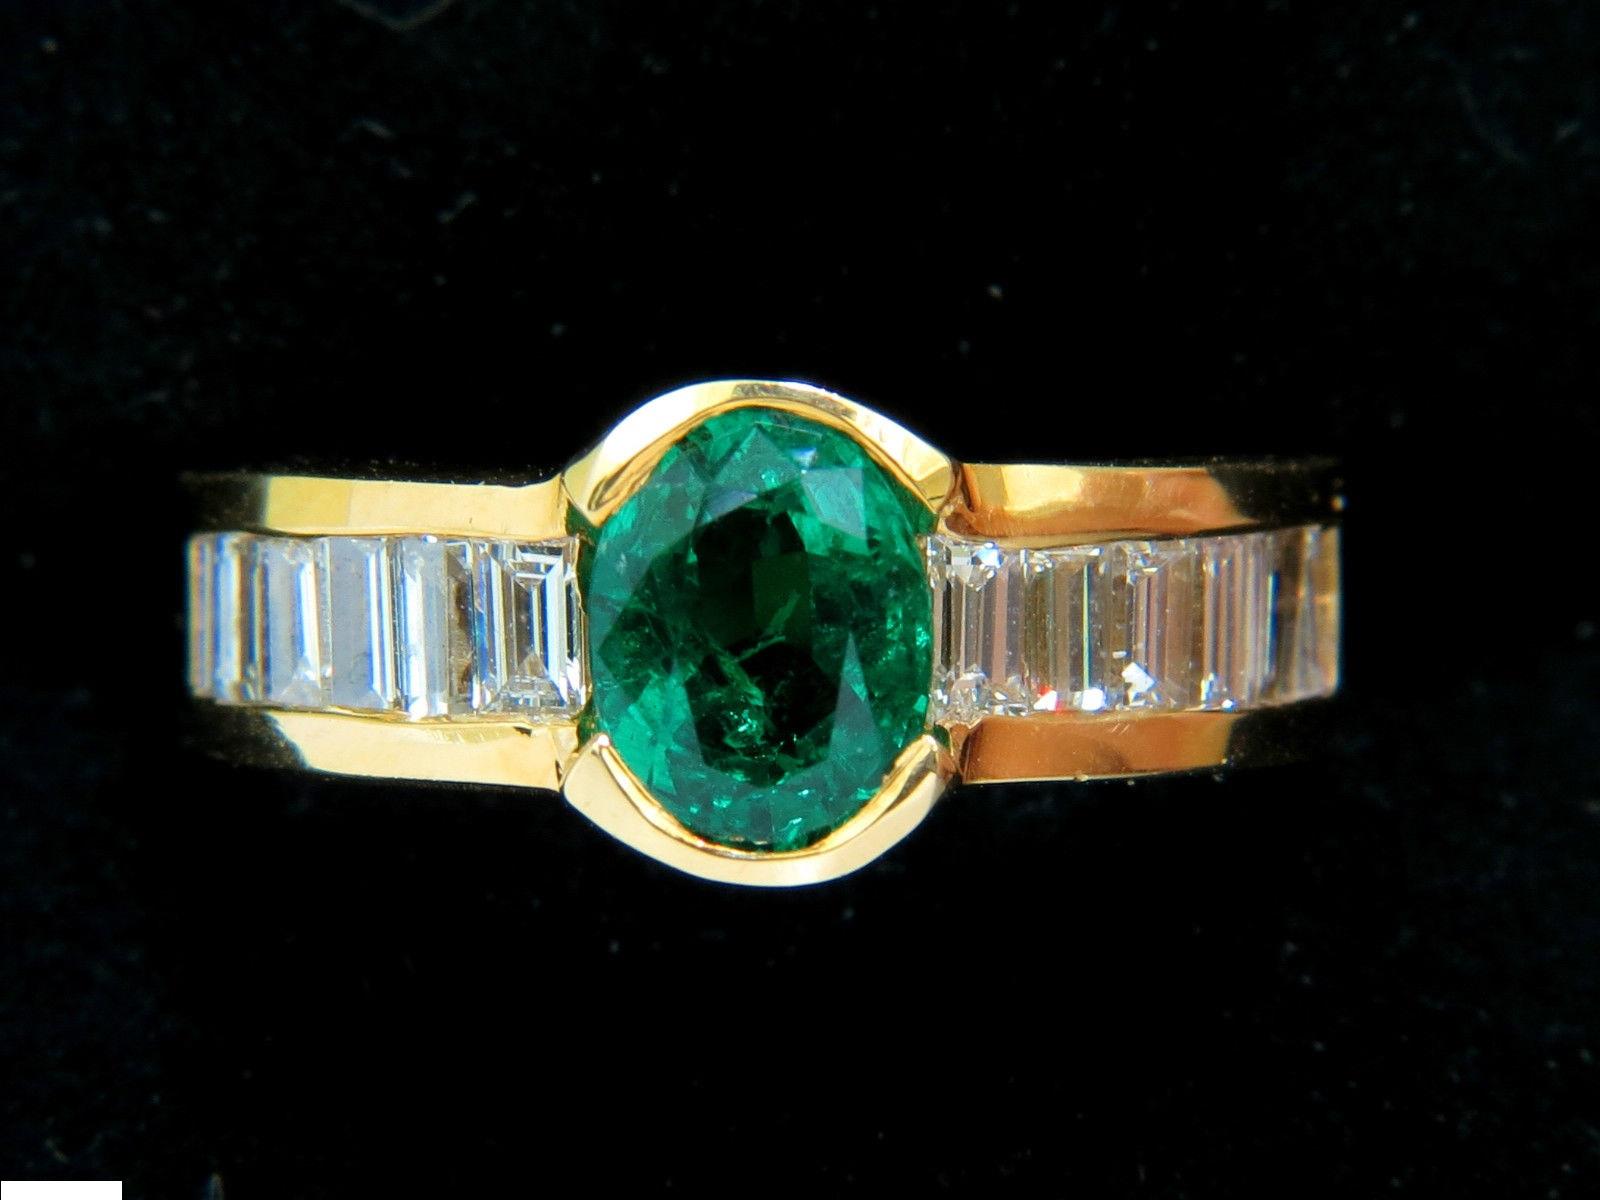 The Vivid.

1.20ct. Natural oval NATURAL Zambian emerald

Emerald is of clean clarity

Full Glow, very vivid in color

&

1.00ct. diamonds

Baguette step cuts

H-color, Vs-2 clarity

Ring measures: 8.55mm wide




14kt. Yellow gold 

5.9